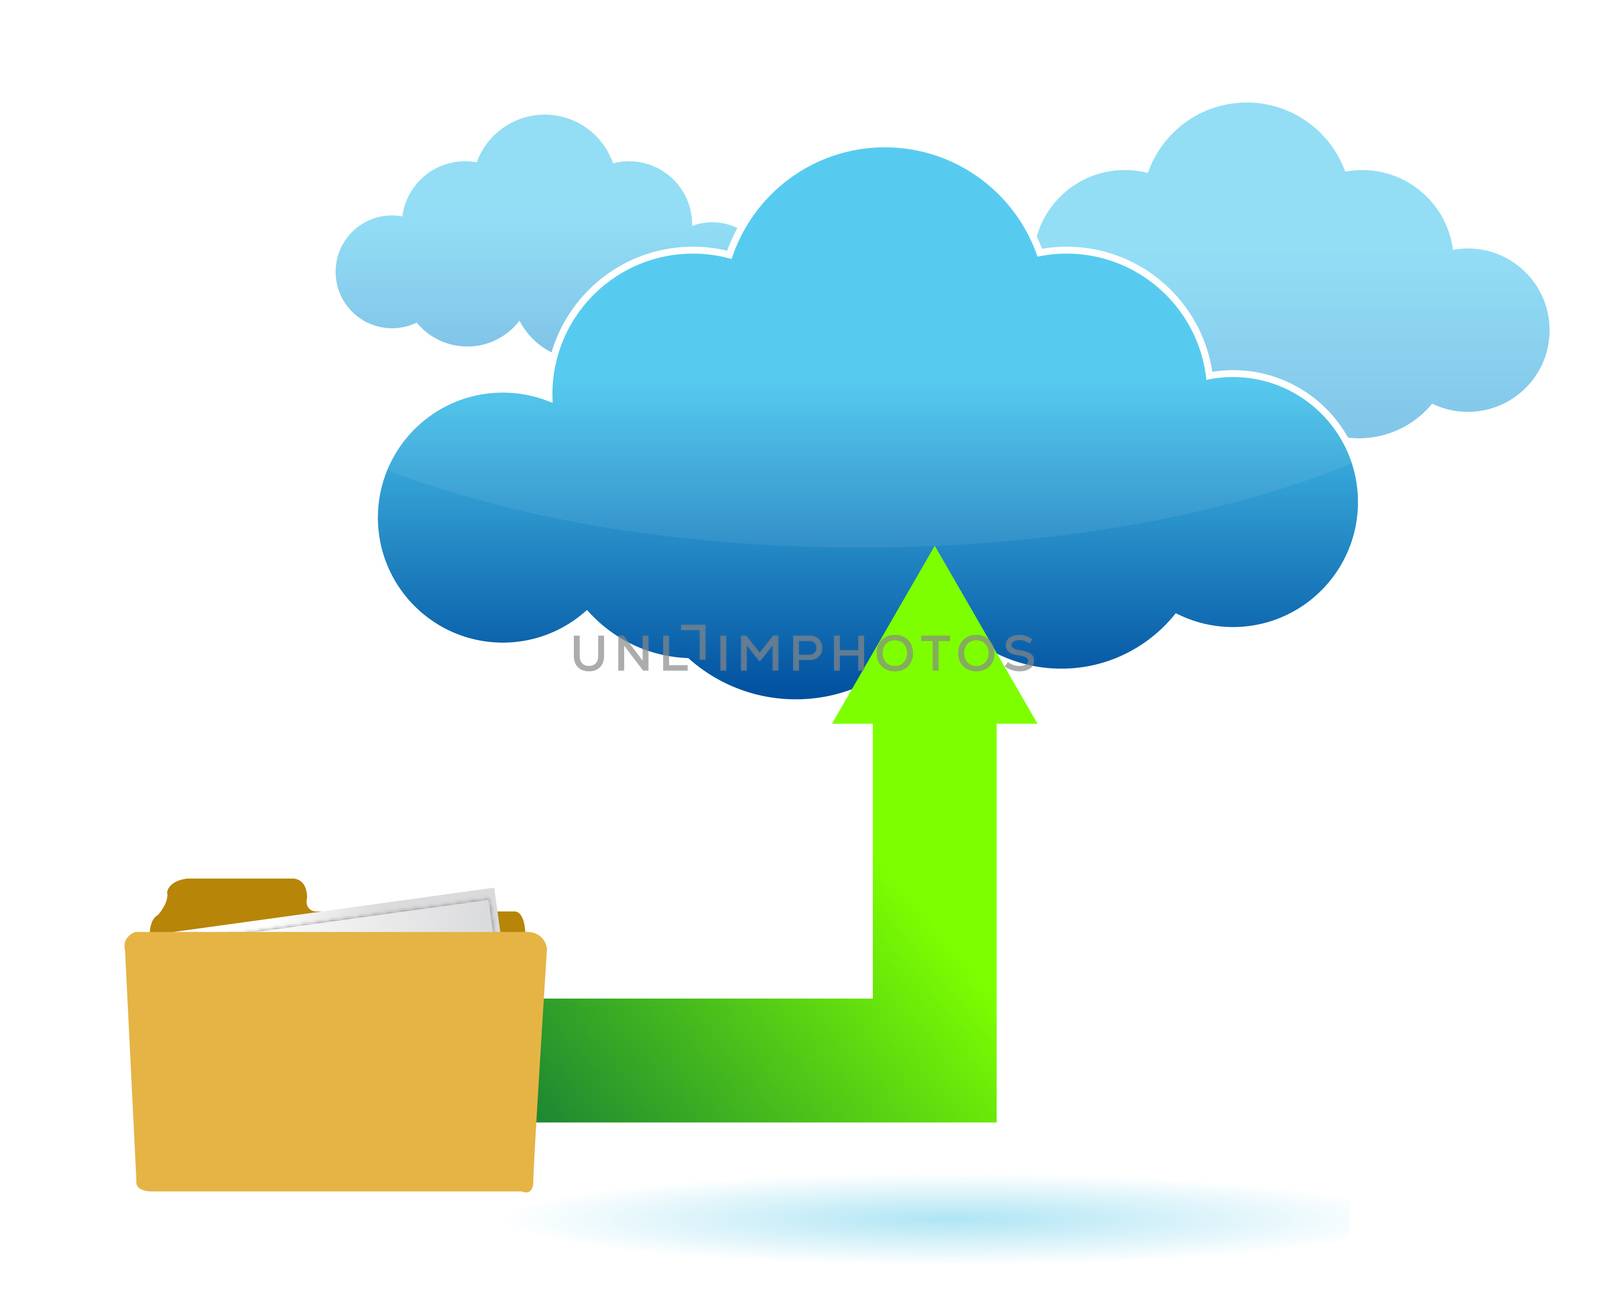 Files being uploaded from a folder to an on-line cloud